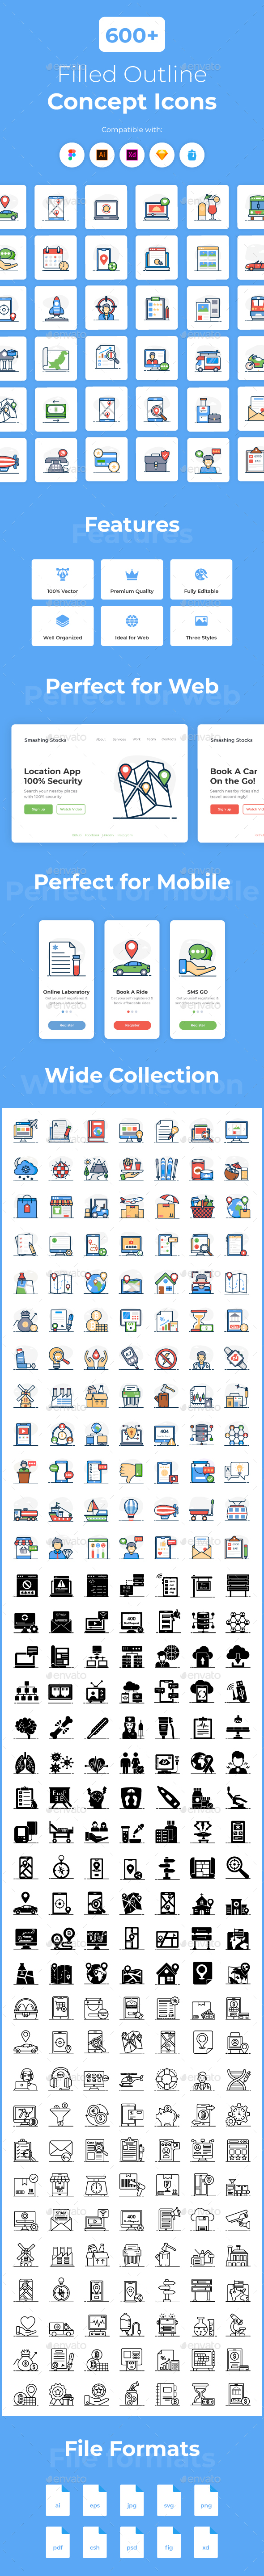 600+ Filled Outline Concept Icons